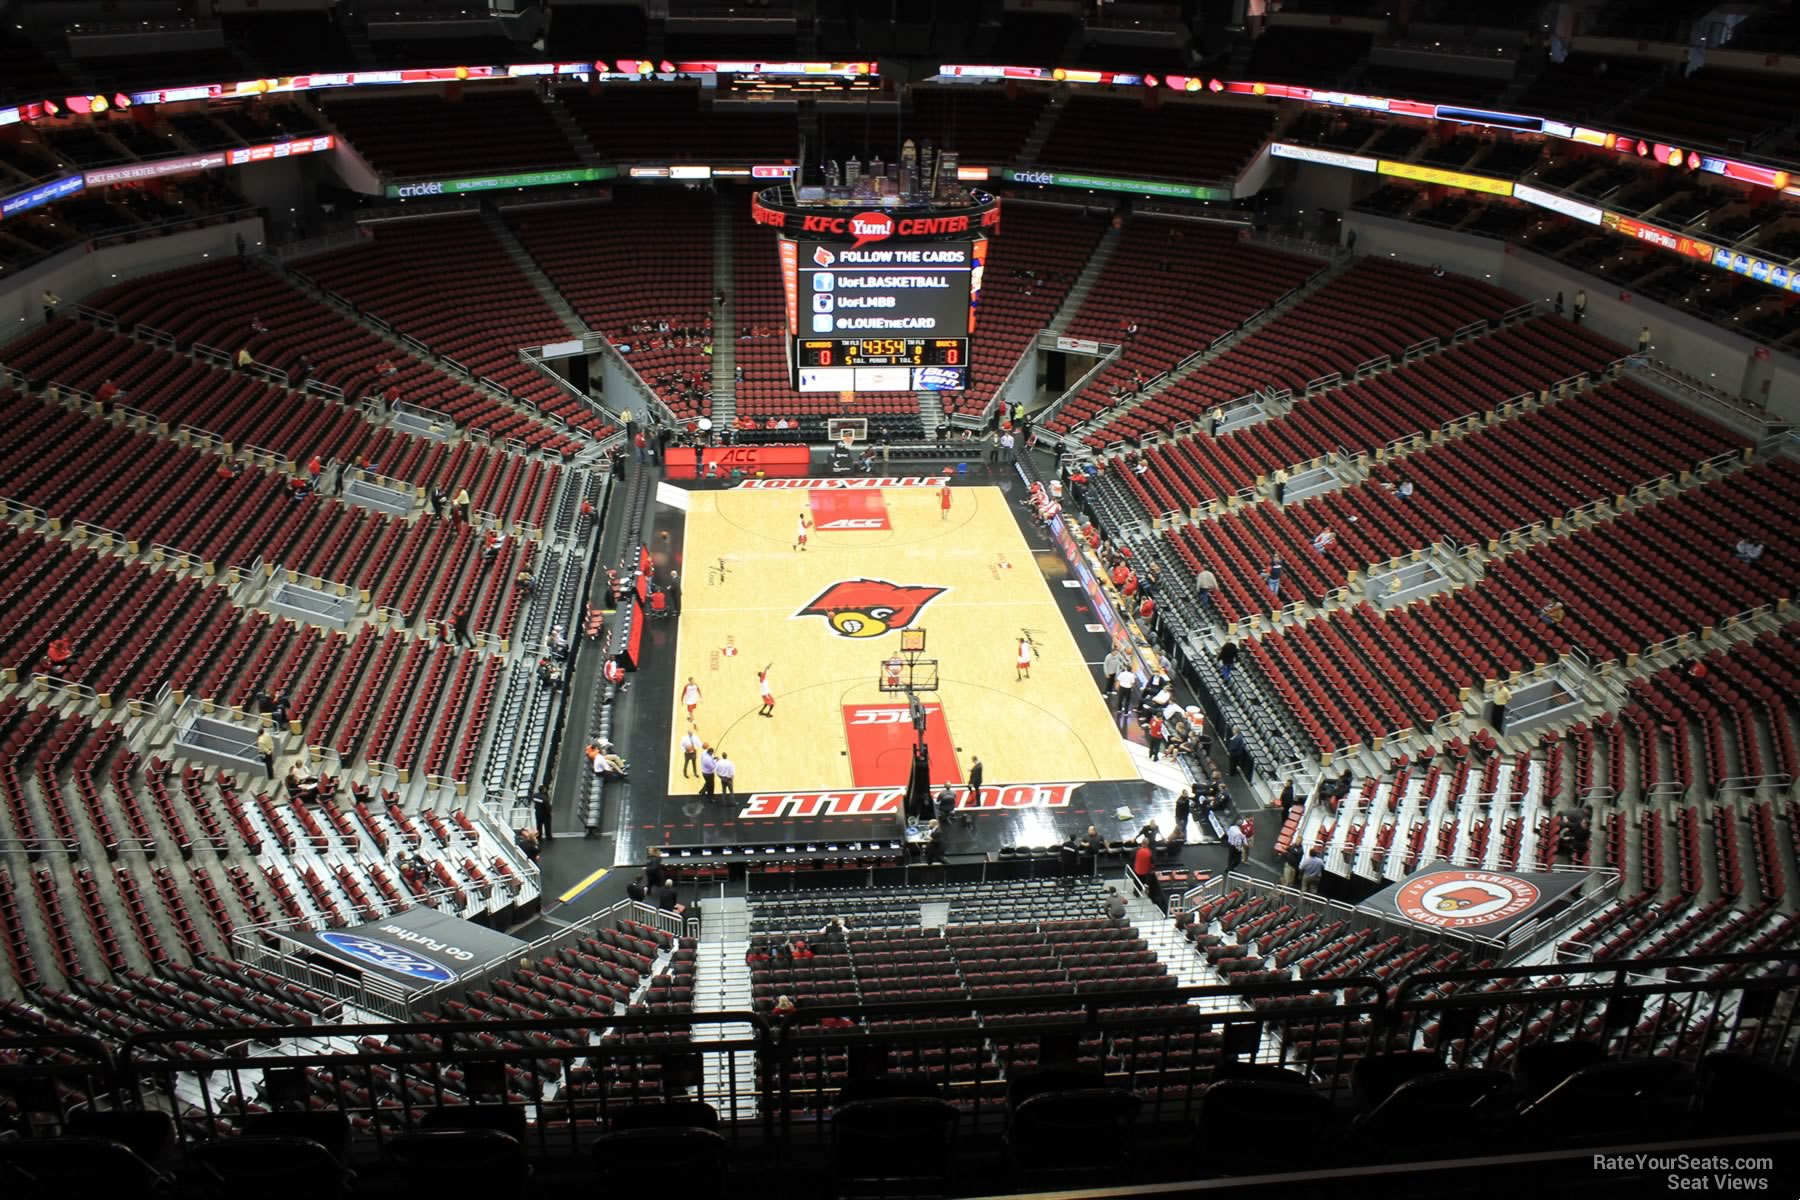 section 301, row j seat view  for basketball - kfc yum! center